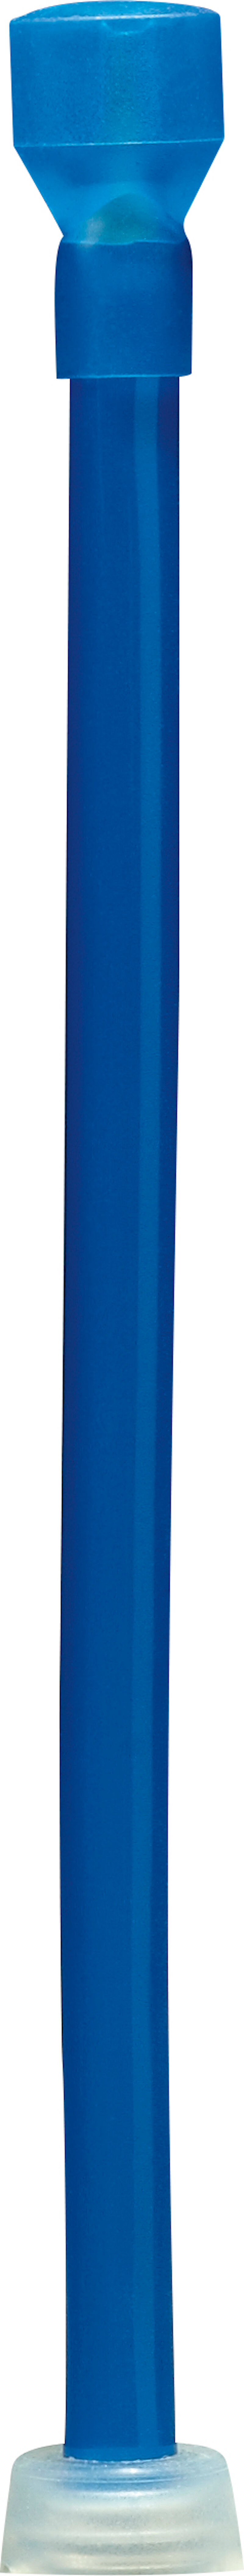 Camelbak Quick Stow Flask Tube Adapter | Hardloop